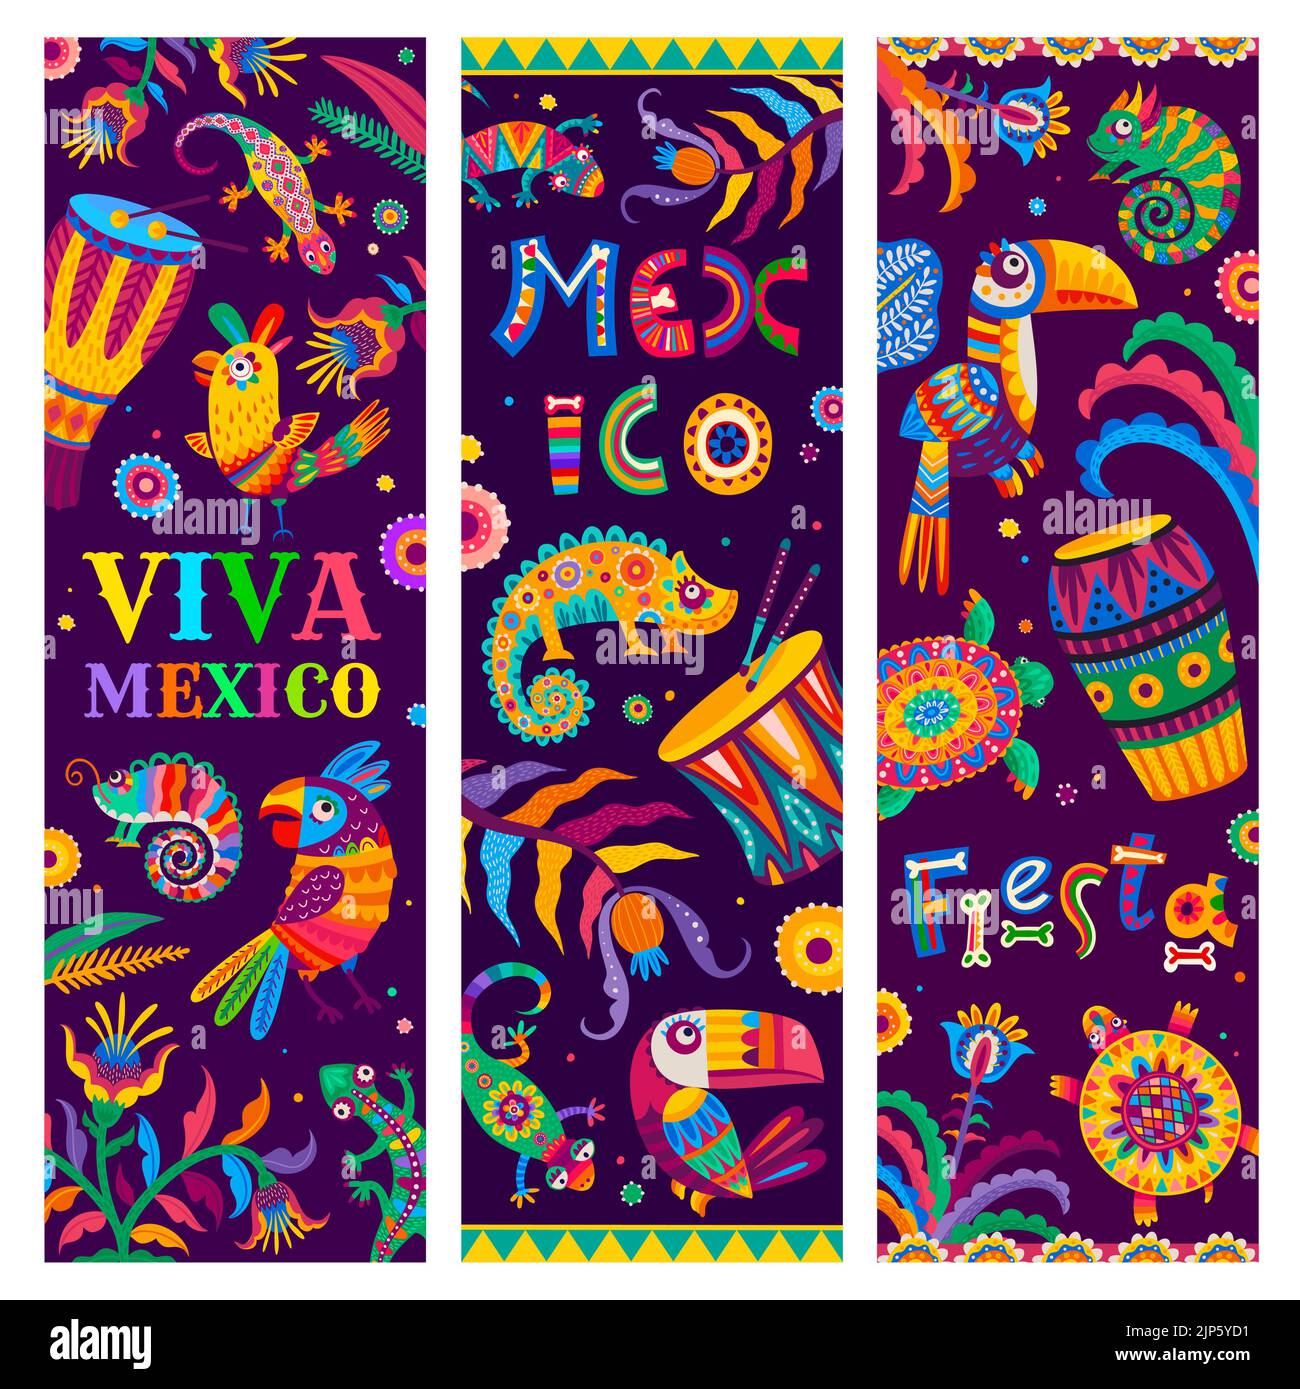 Viva Mexico, brazilian and mexican fiesta holiday banners with bright color vector pattern of animals, flowers and drums. Chameleons, toucans, parrots and turtles, gecko lizards and tropical plants Stock Vector